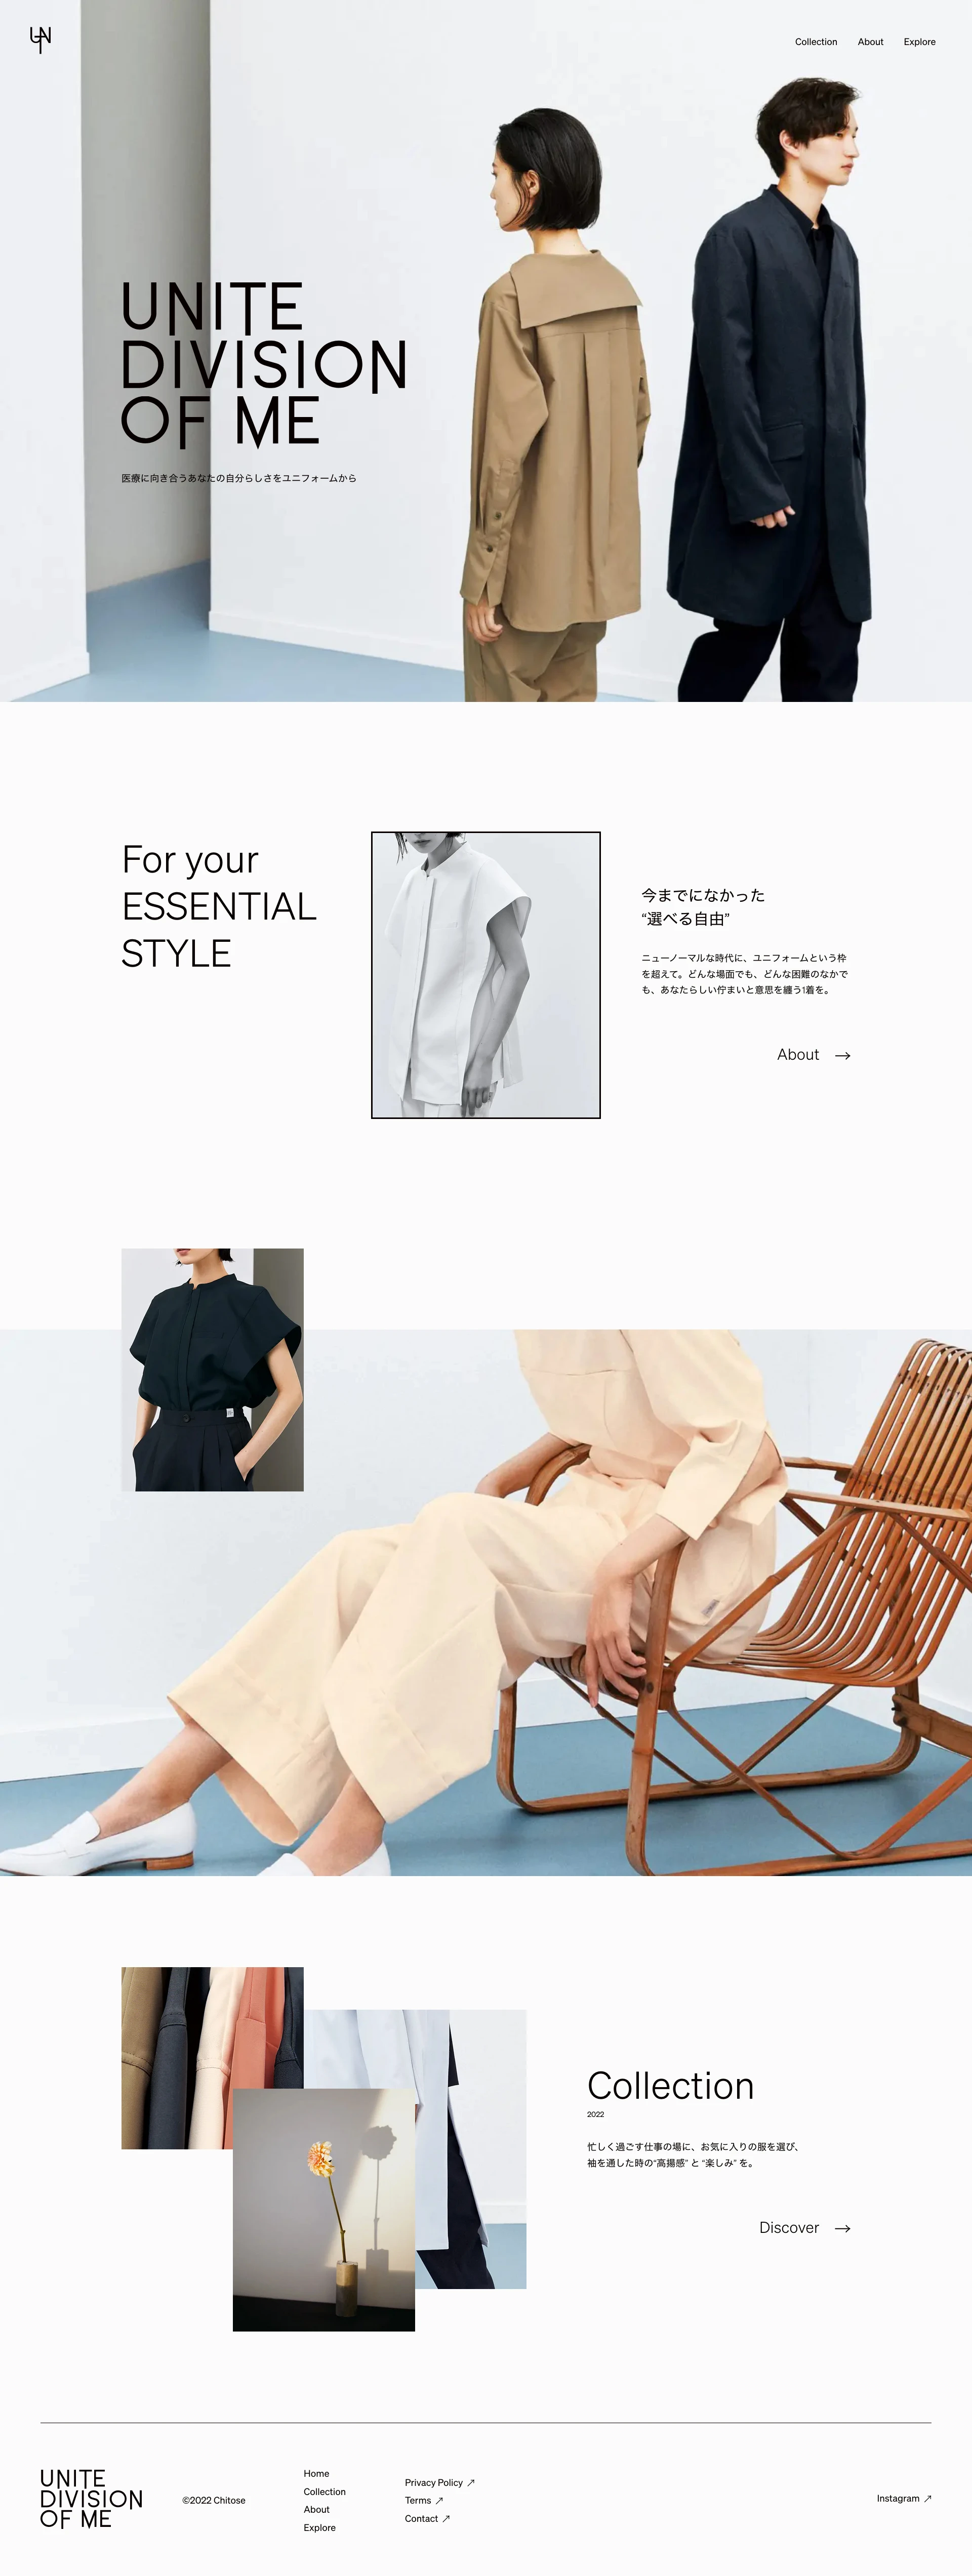 UNITE DIVISION OF ME Landing Page Example: For your essential style.